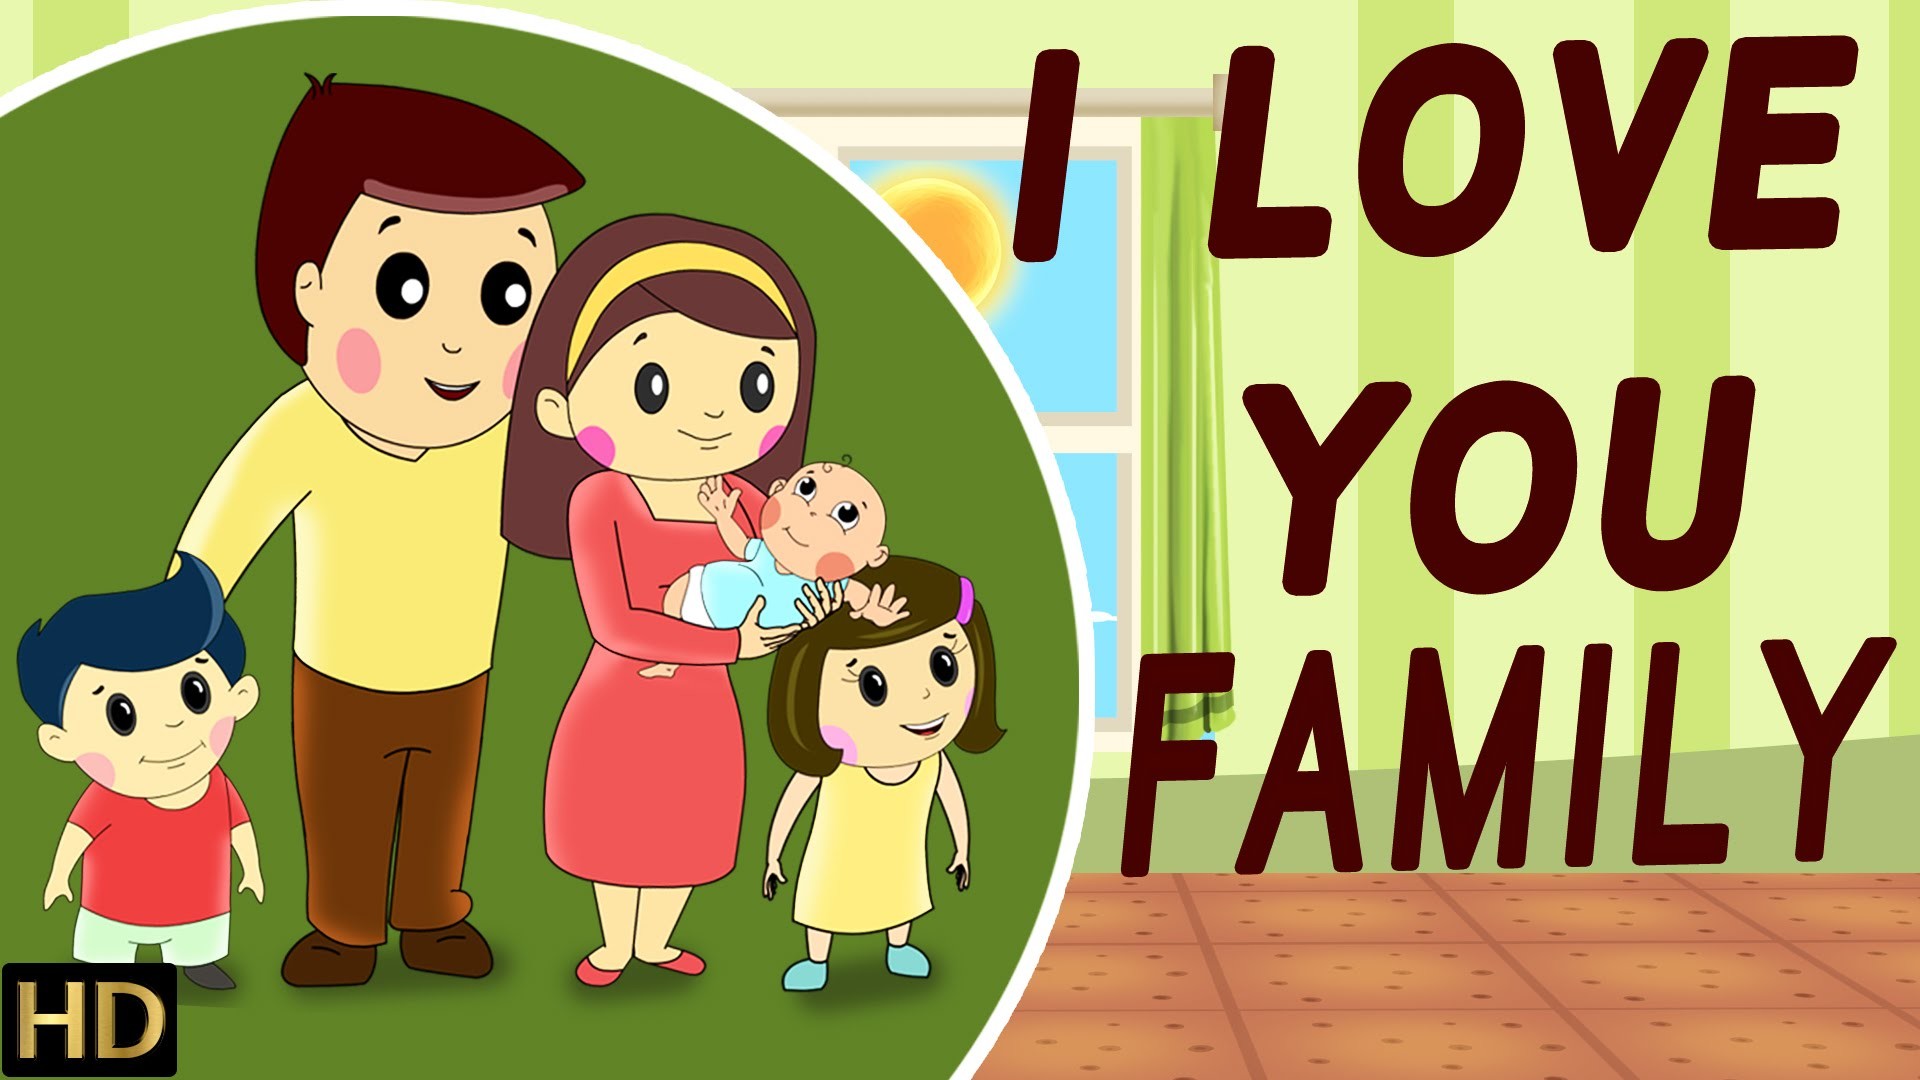 I Love You - Love You All Family - HD Wallpaper 